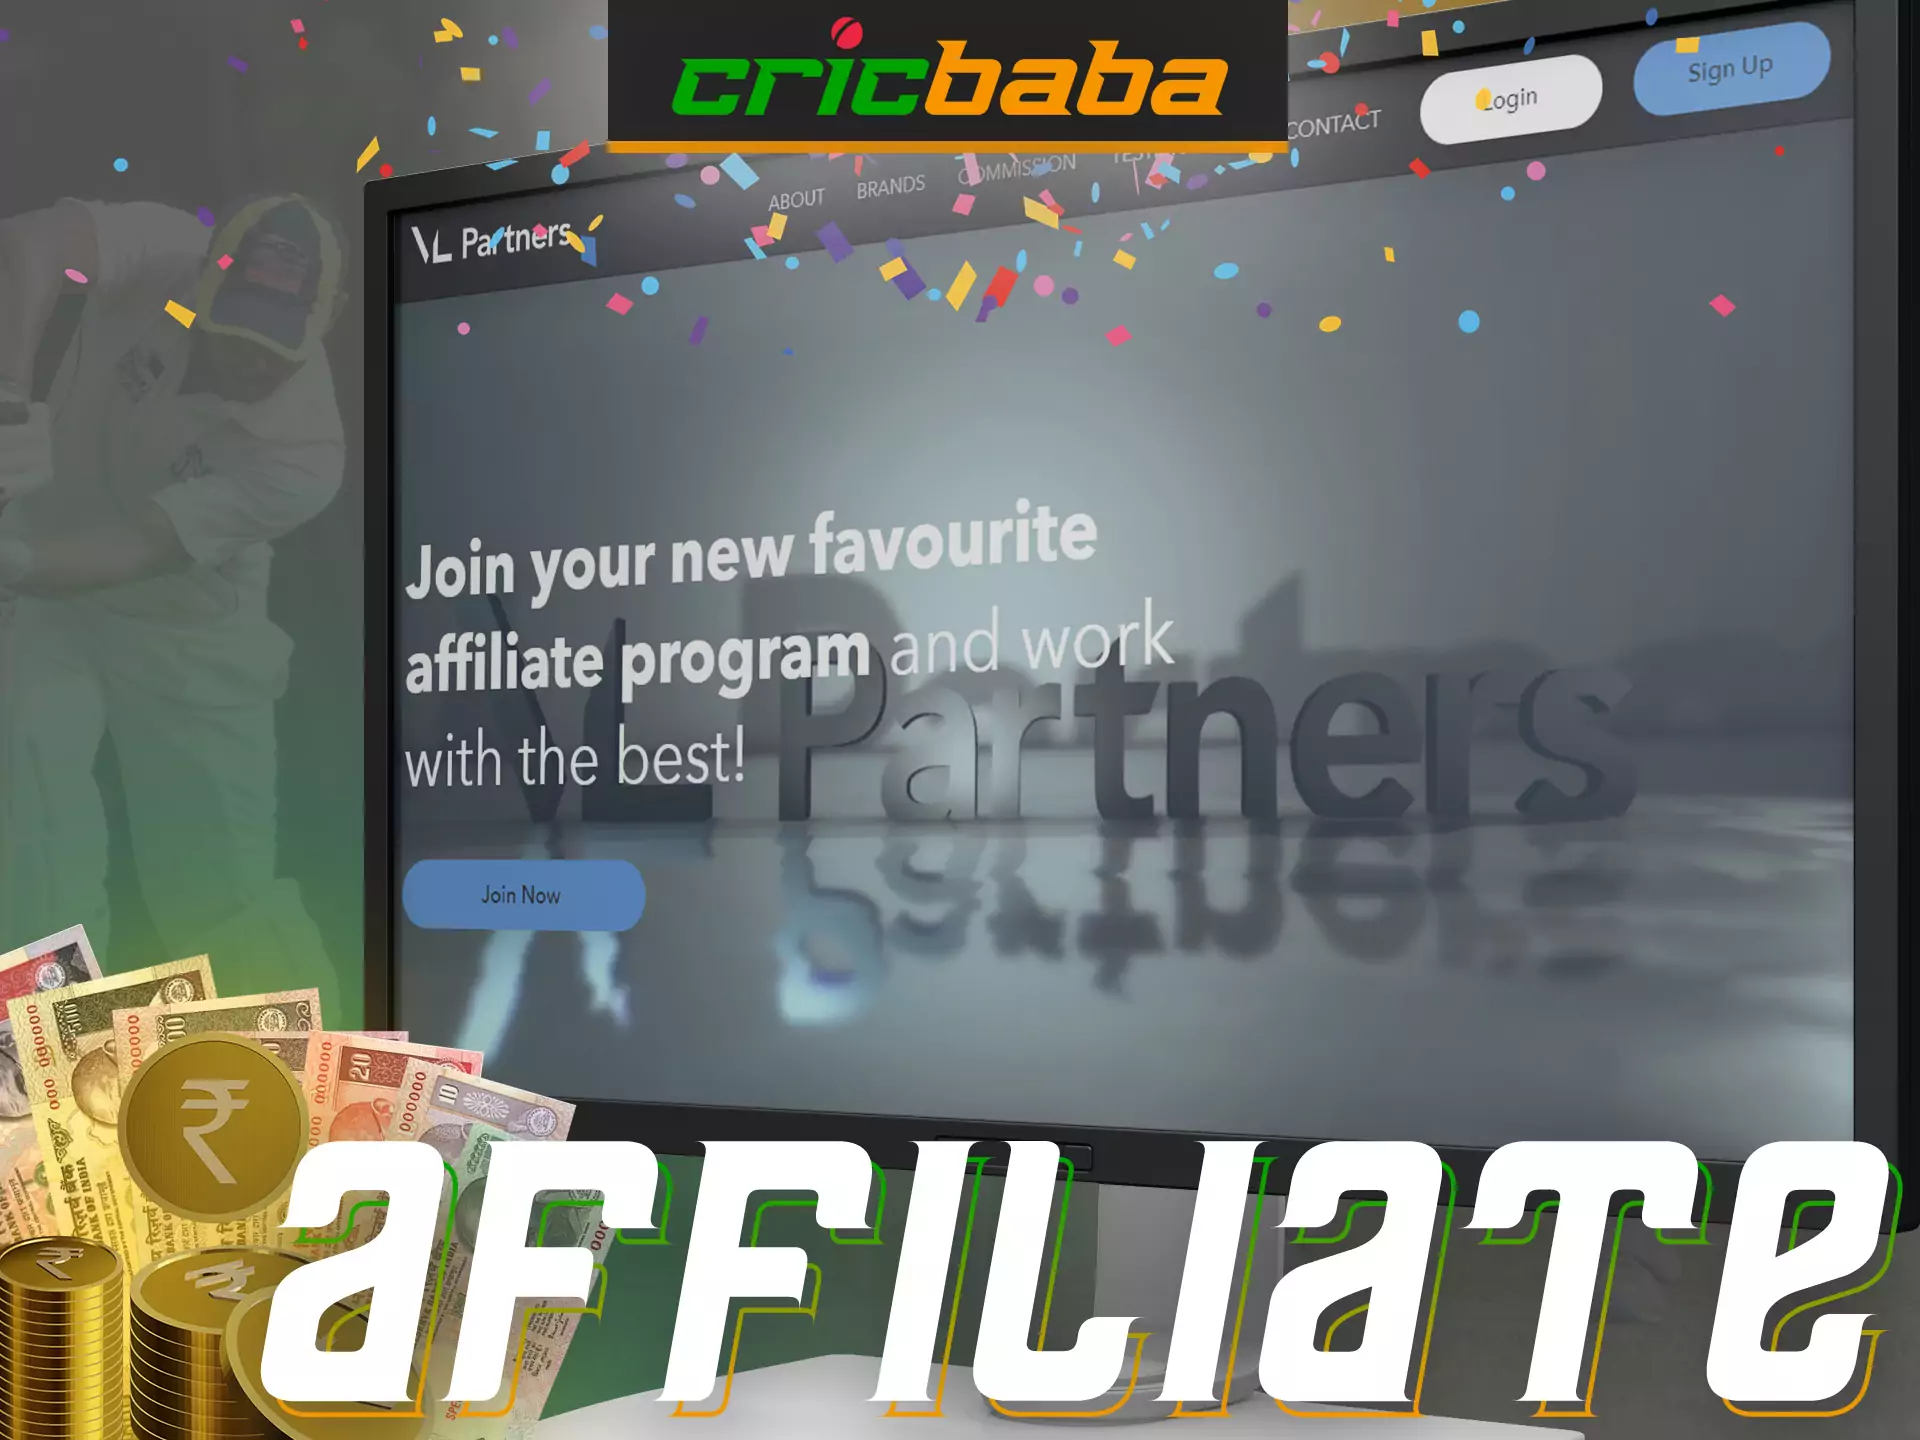 Join the Cricbaba affiliate program, get great benefits.